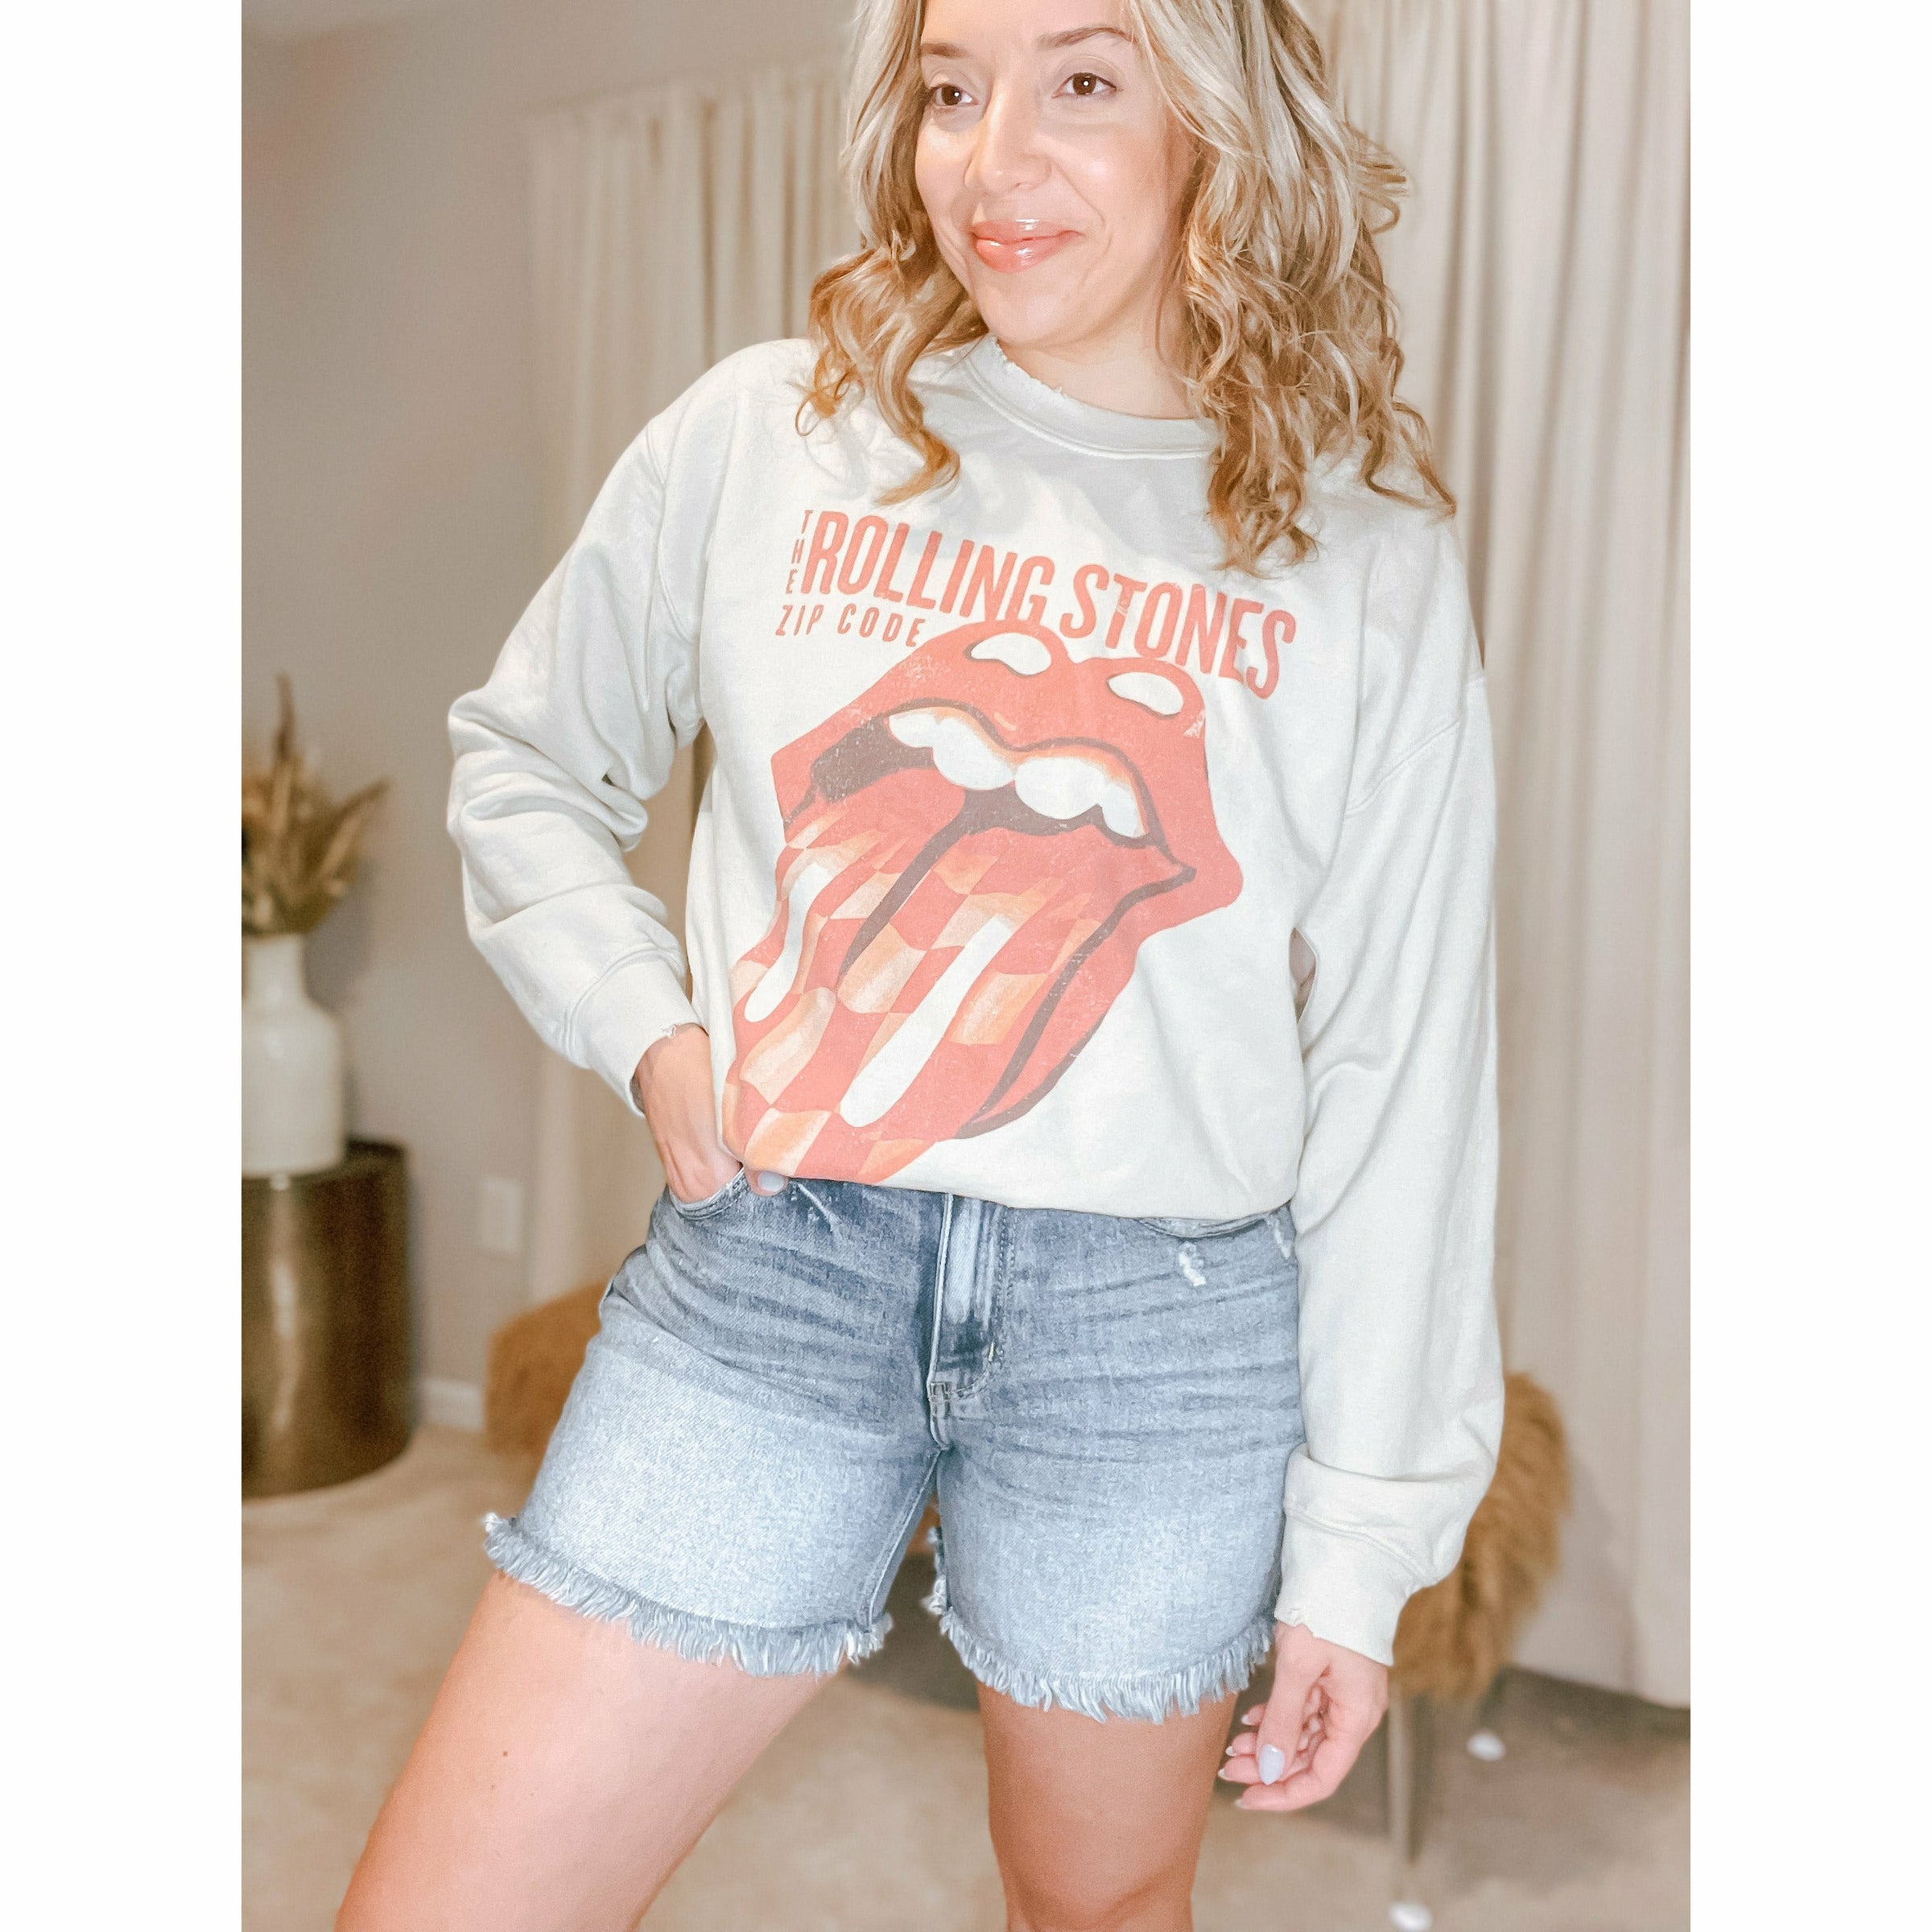 Rolling Stones Sweatshirt - The Hive by Chris Jesselle